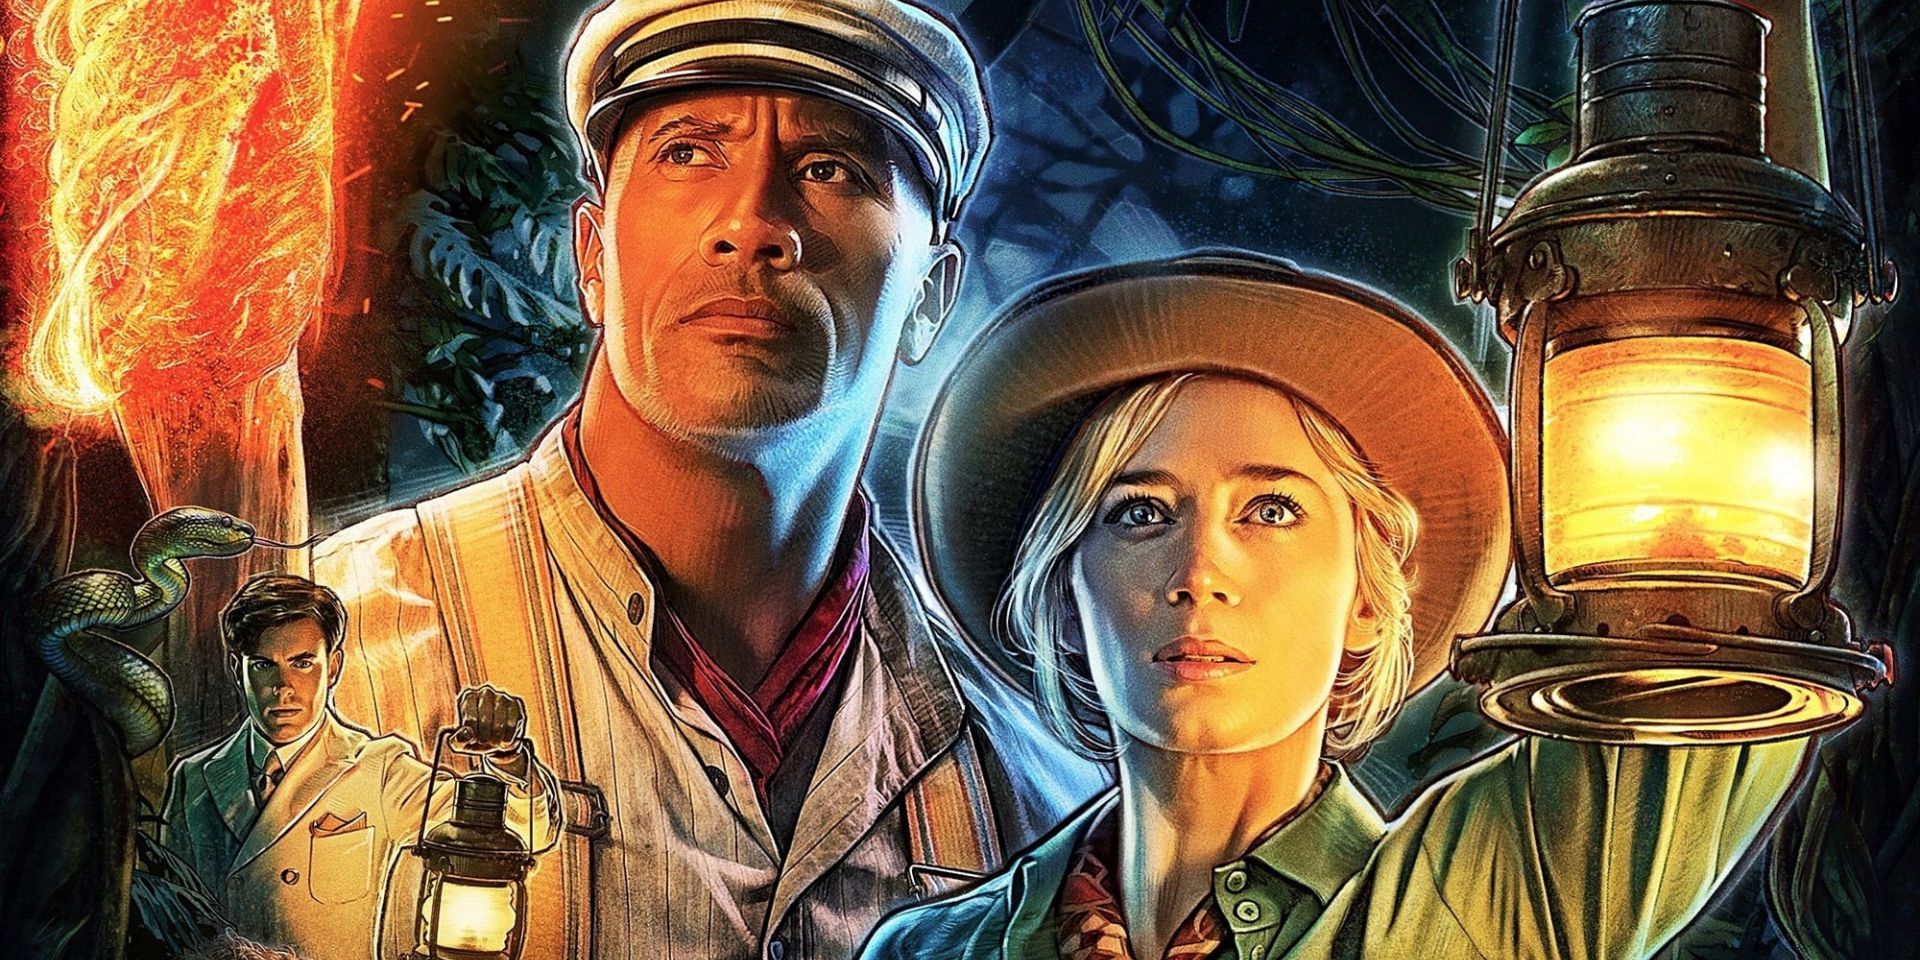 Frank and Lily in Jungle Cruise